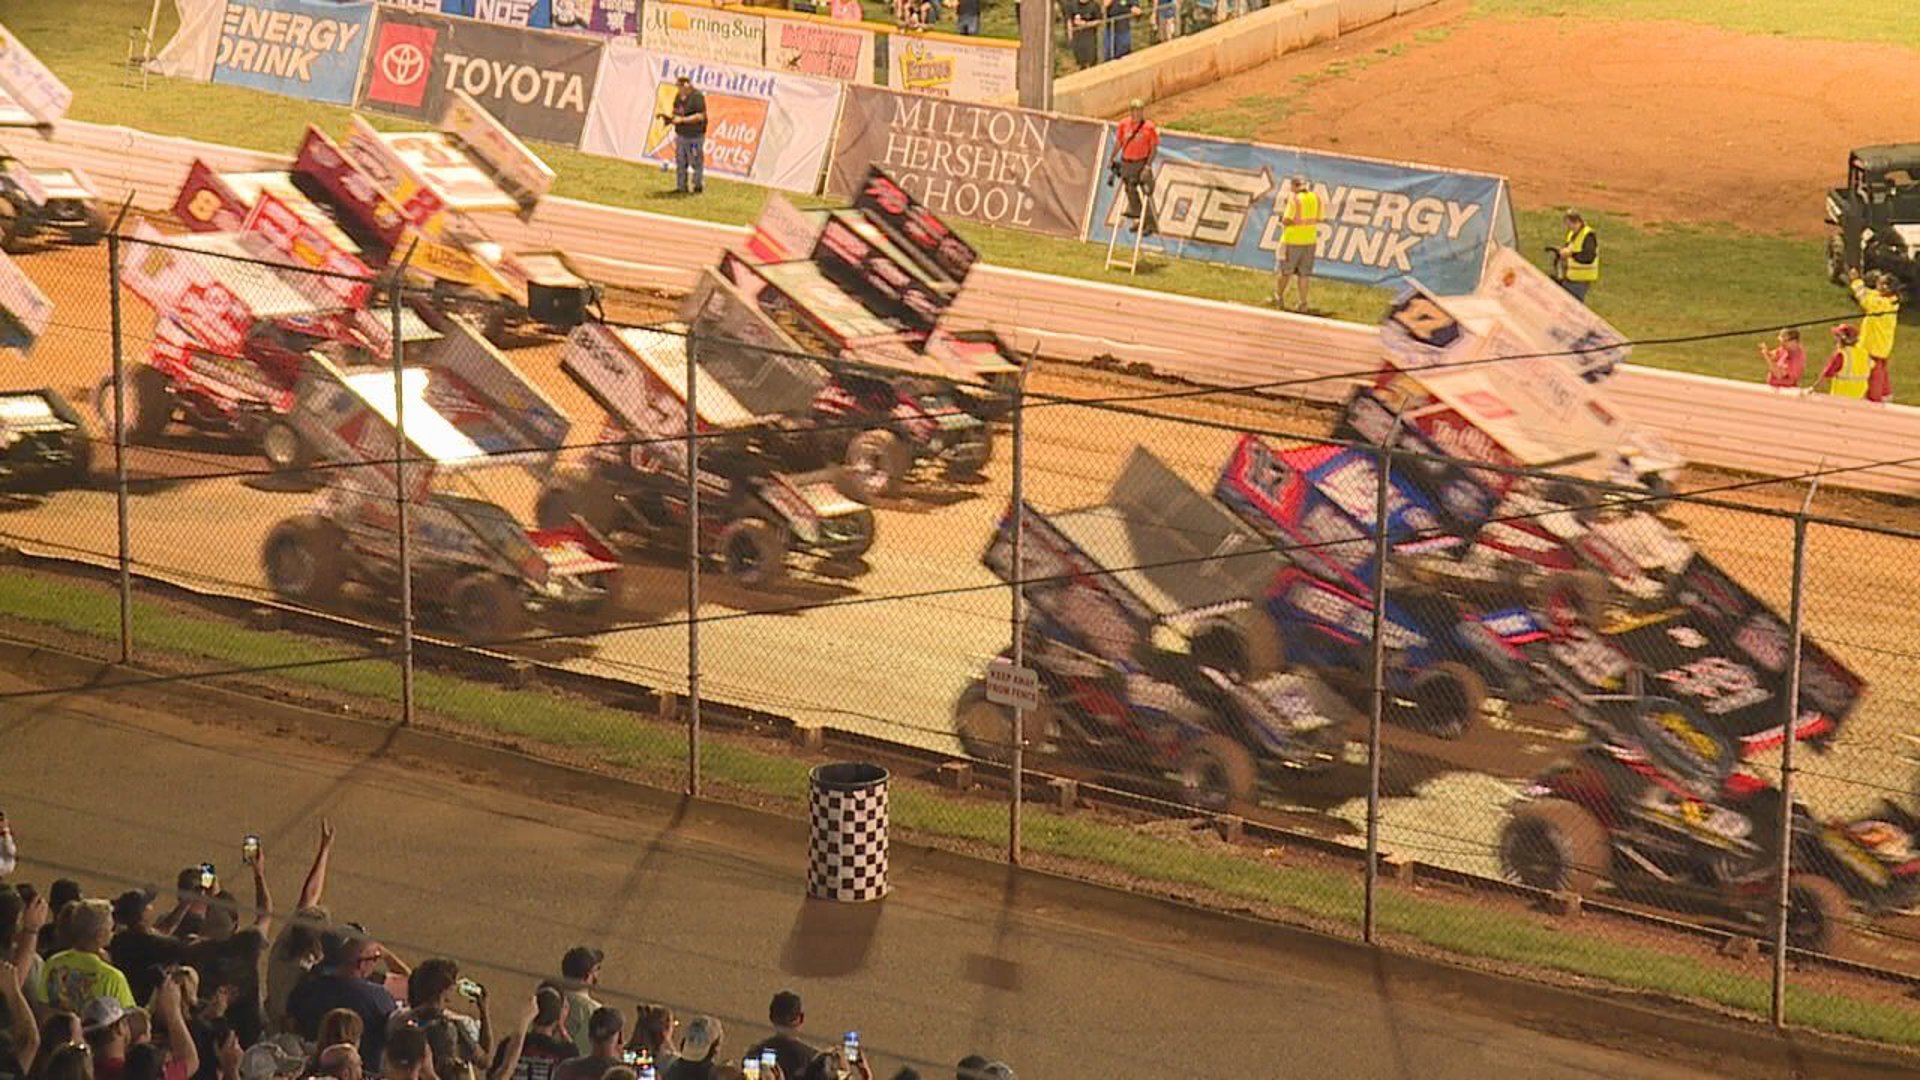 Sprint car racing fans both near and far travel to Central Pennsylvania to catch the deep-rooted rivalry on full-display at Lincoln Speedway.